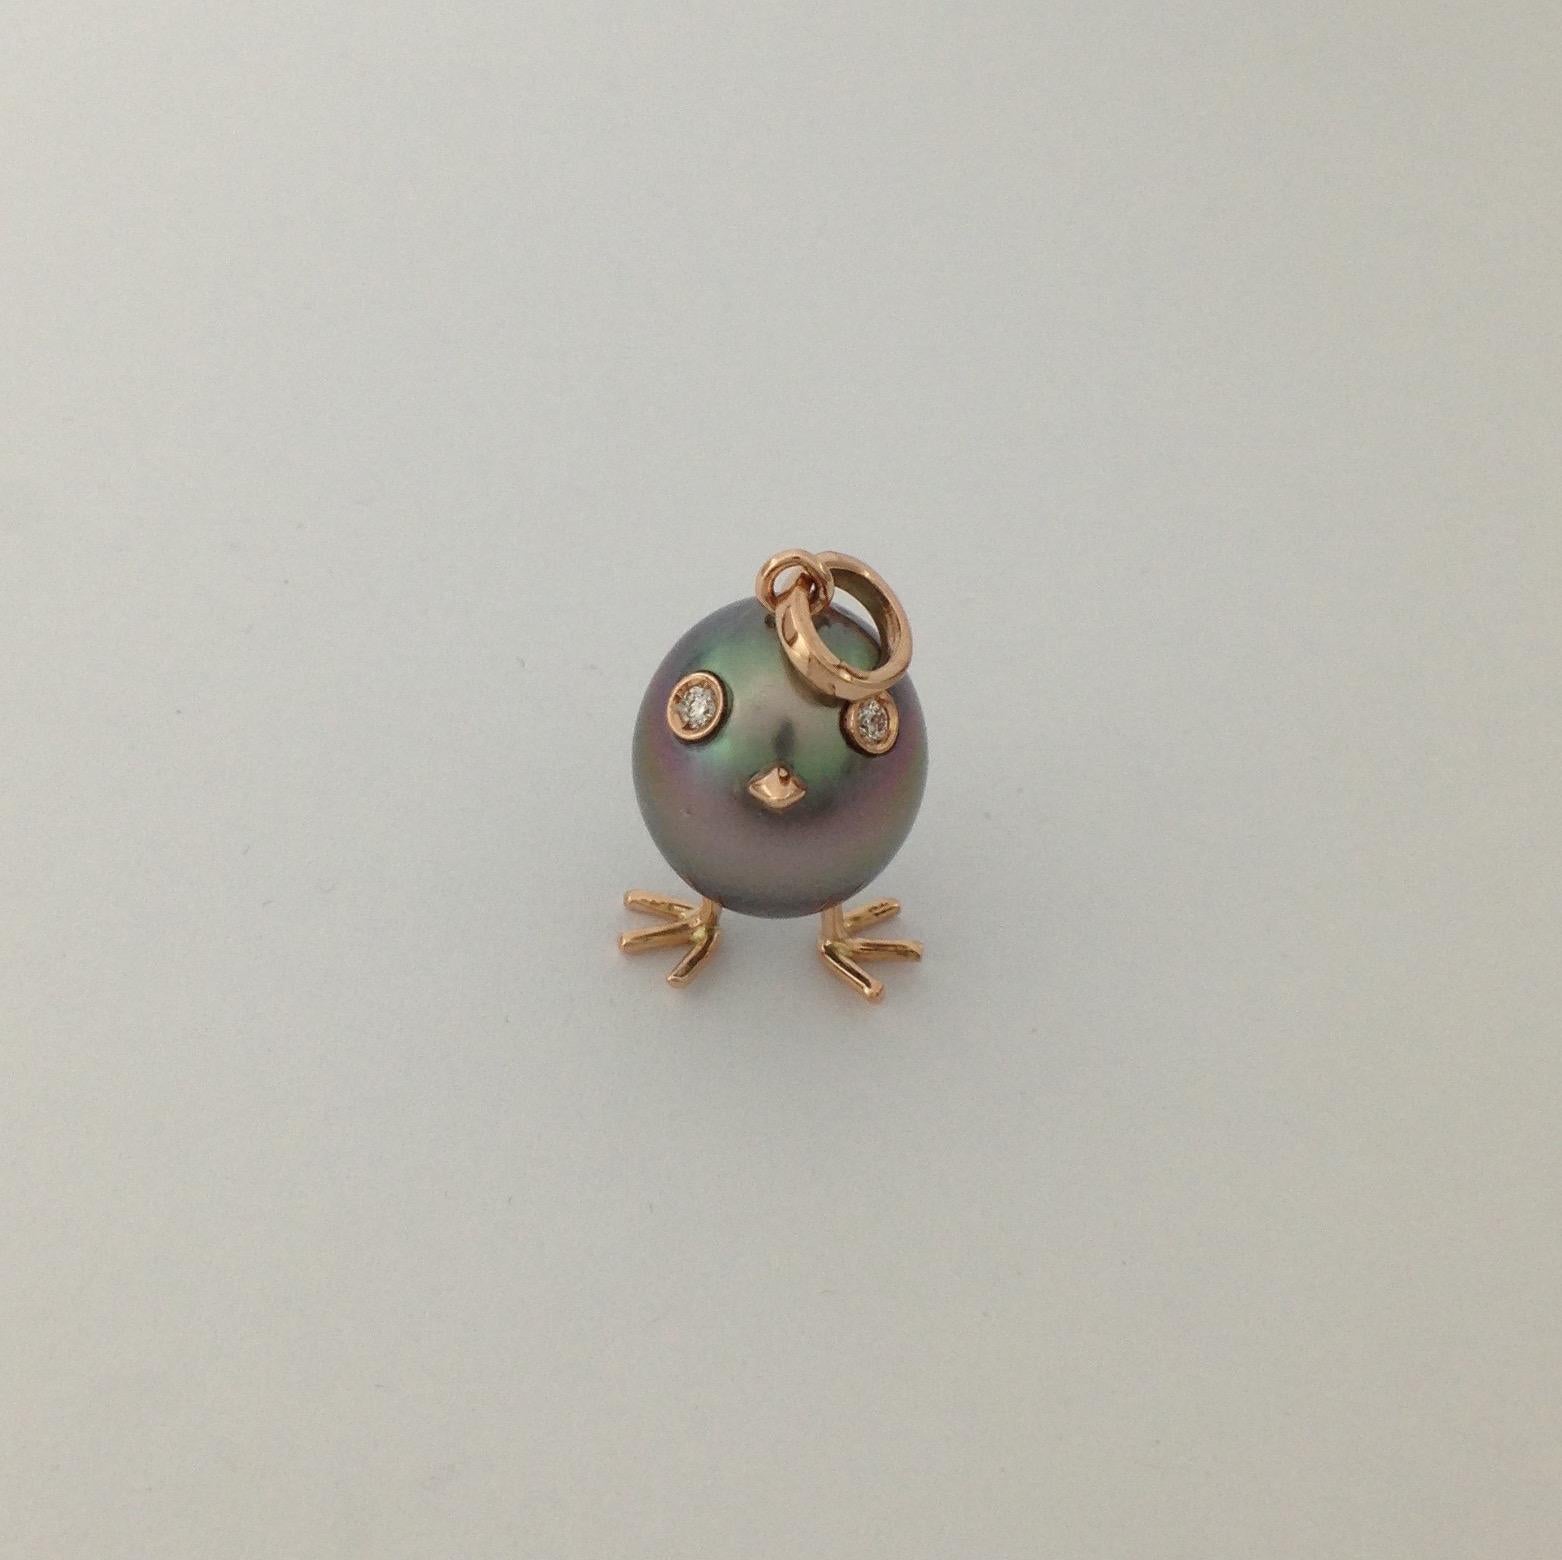 A beautiful Tahitian pearl has been carefully crafted to make a chick. He has his two legs, two eyes encrusted with two white diamonds and his beak. 
The gold is red for all the particulars.
The caliber is ct 0.03.
The height of the pendant